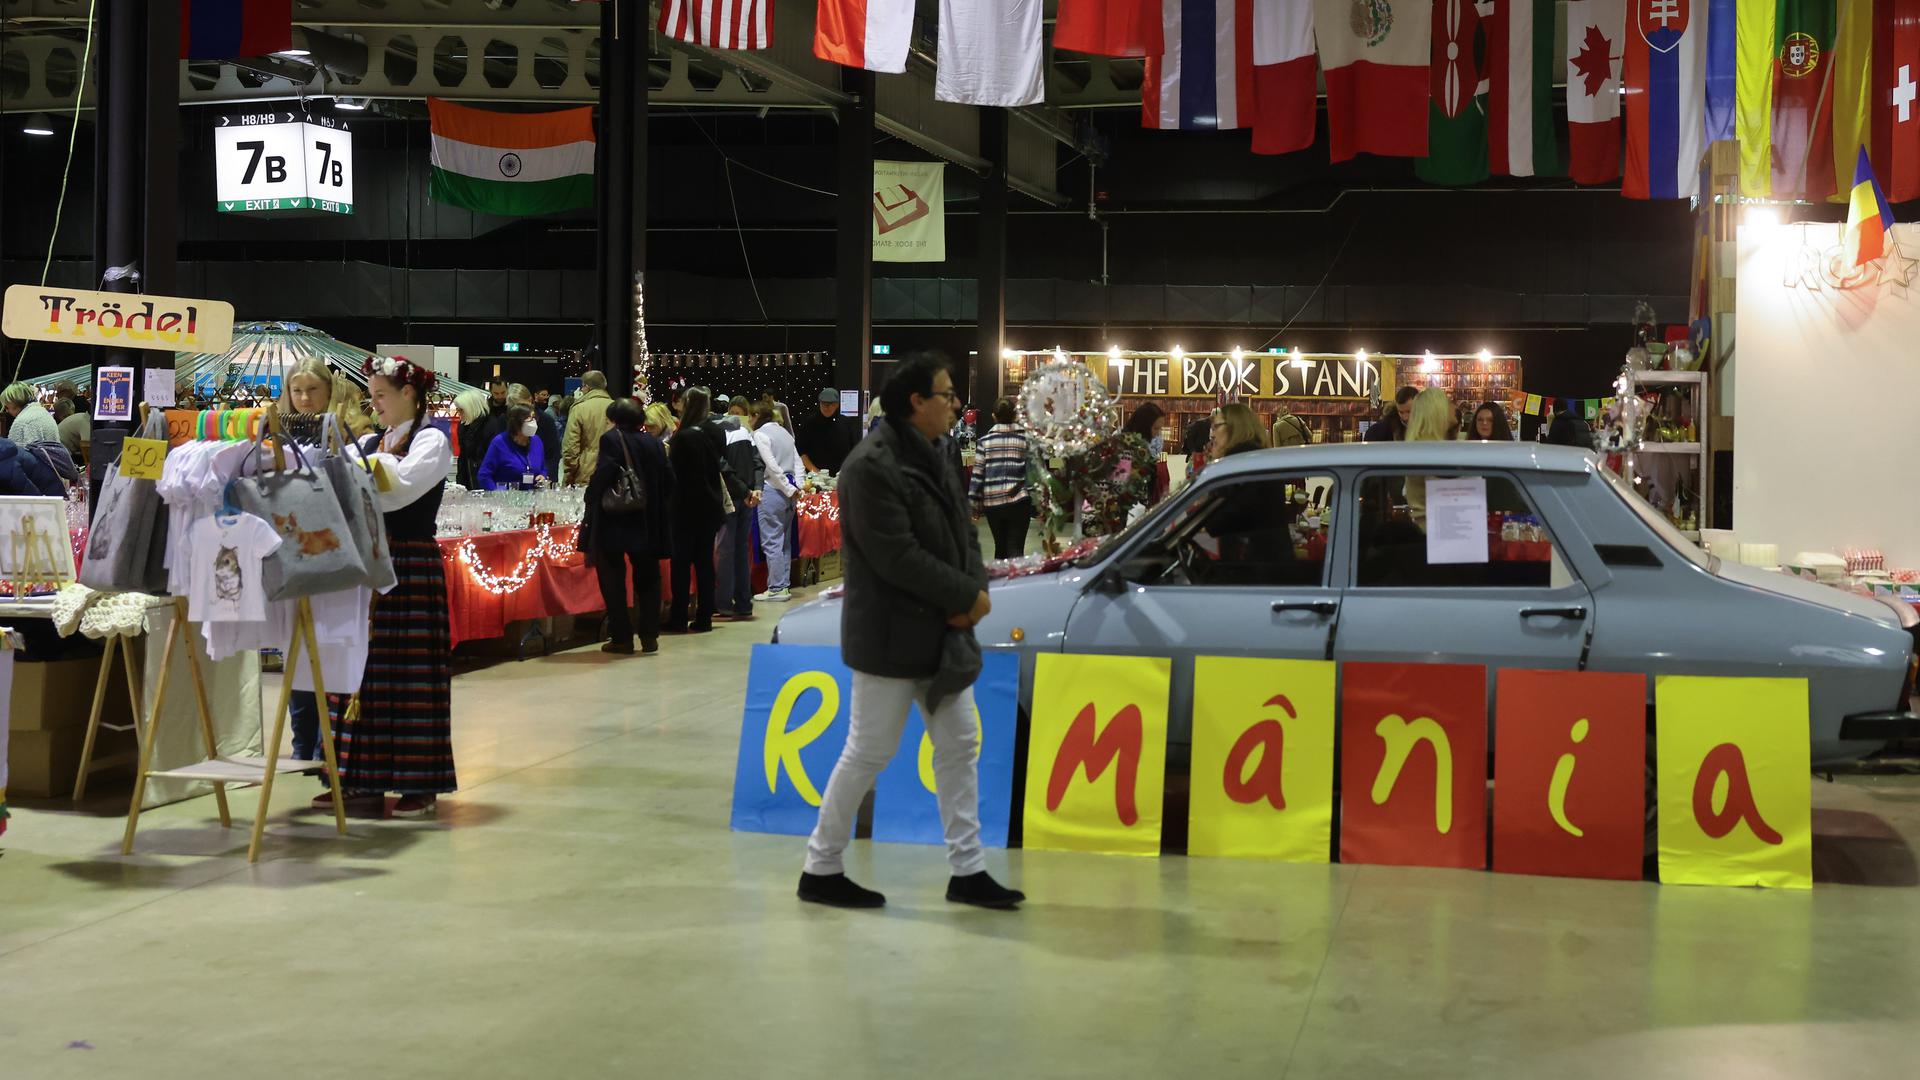 Almost 60 nationalities, with food and crafts from their home countries, under one roof at LuxExpo